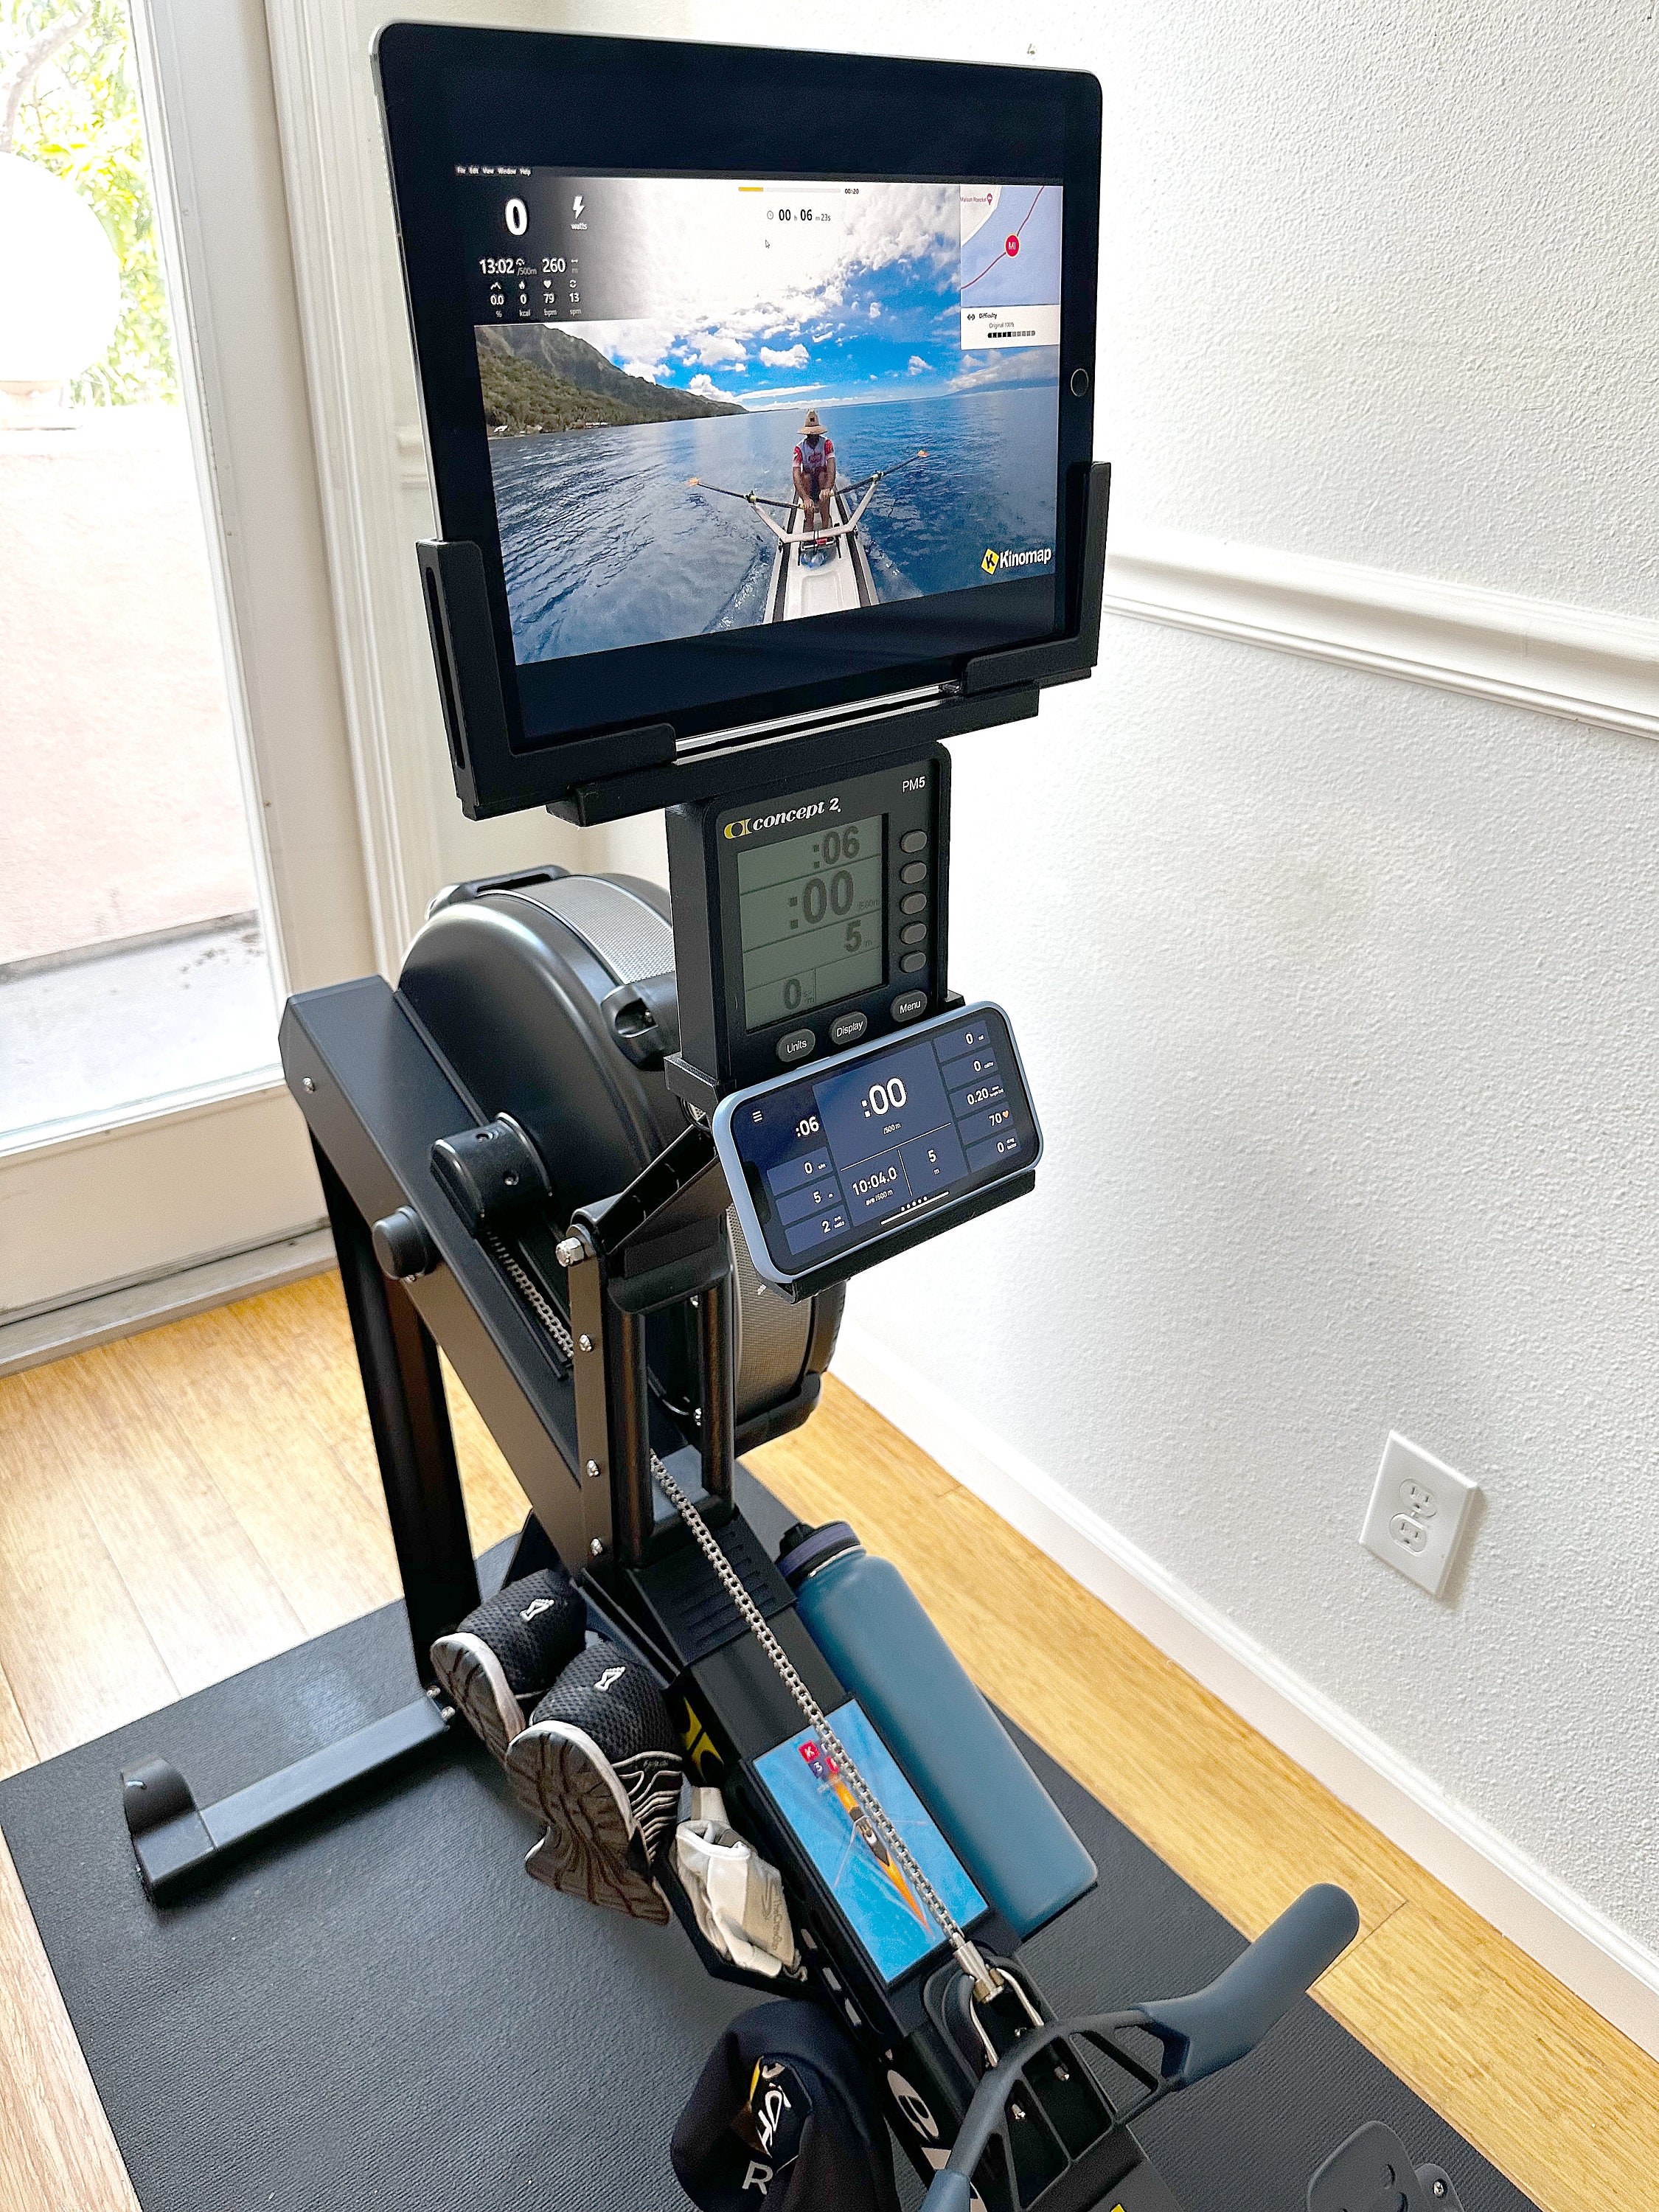 Water RowerTablet Holder - US Fitness